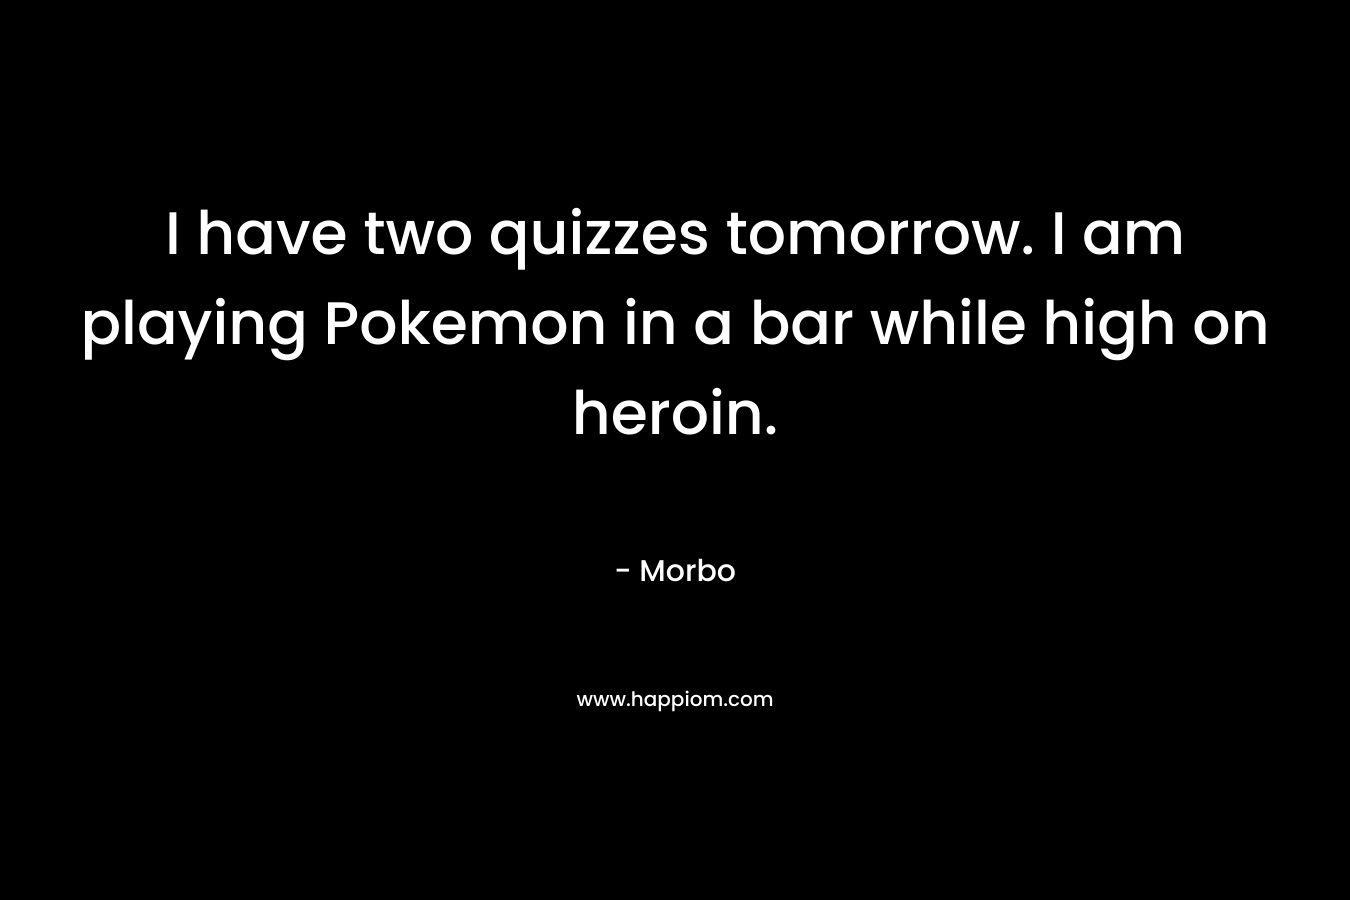 I have two quizzes tomorrow. I am playing Pokemon in a bar while high on heroin.